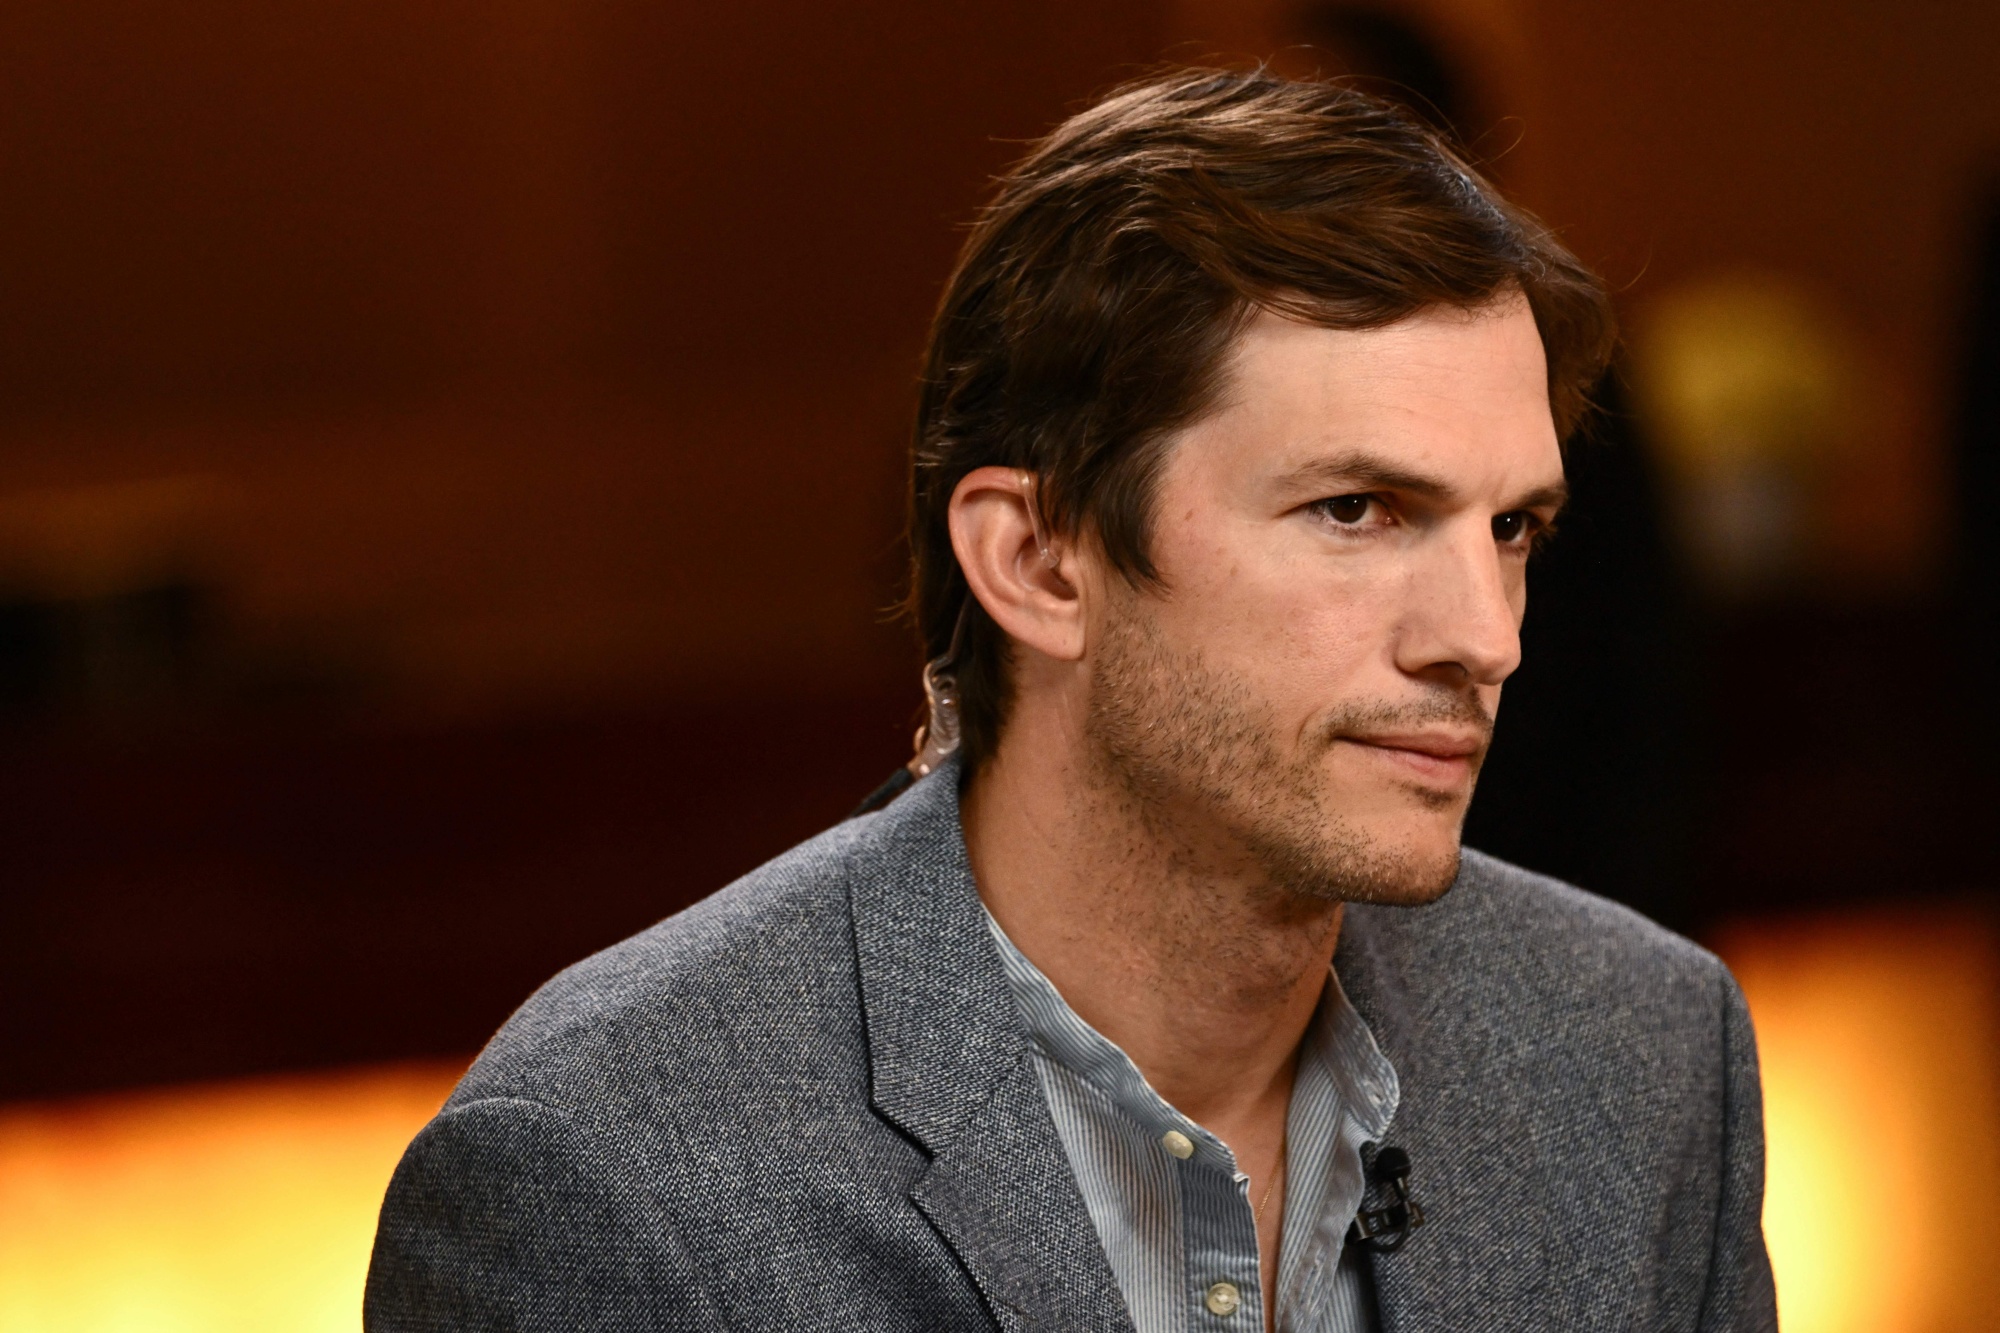 Ashton Kutcher Says VC Firm Raised Debut AI Fund in Five Weeks - Bloomberg